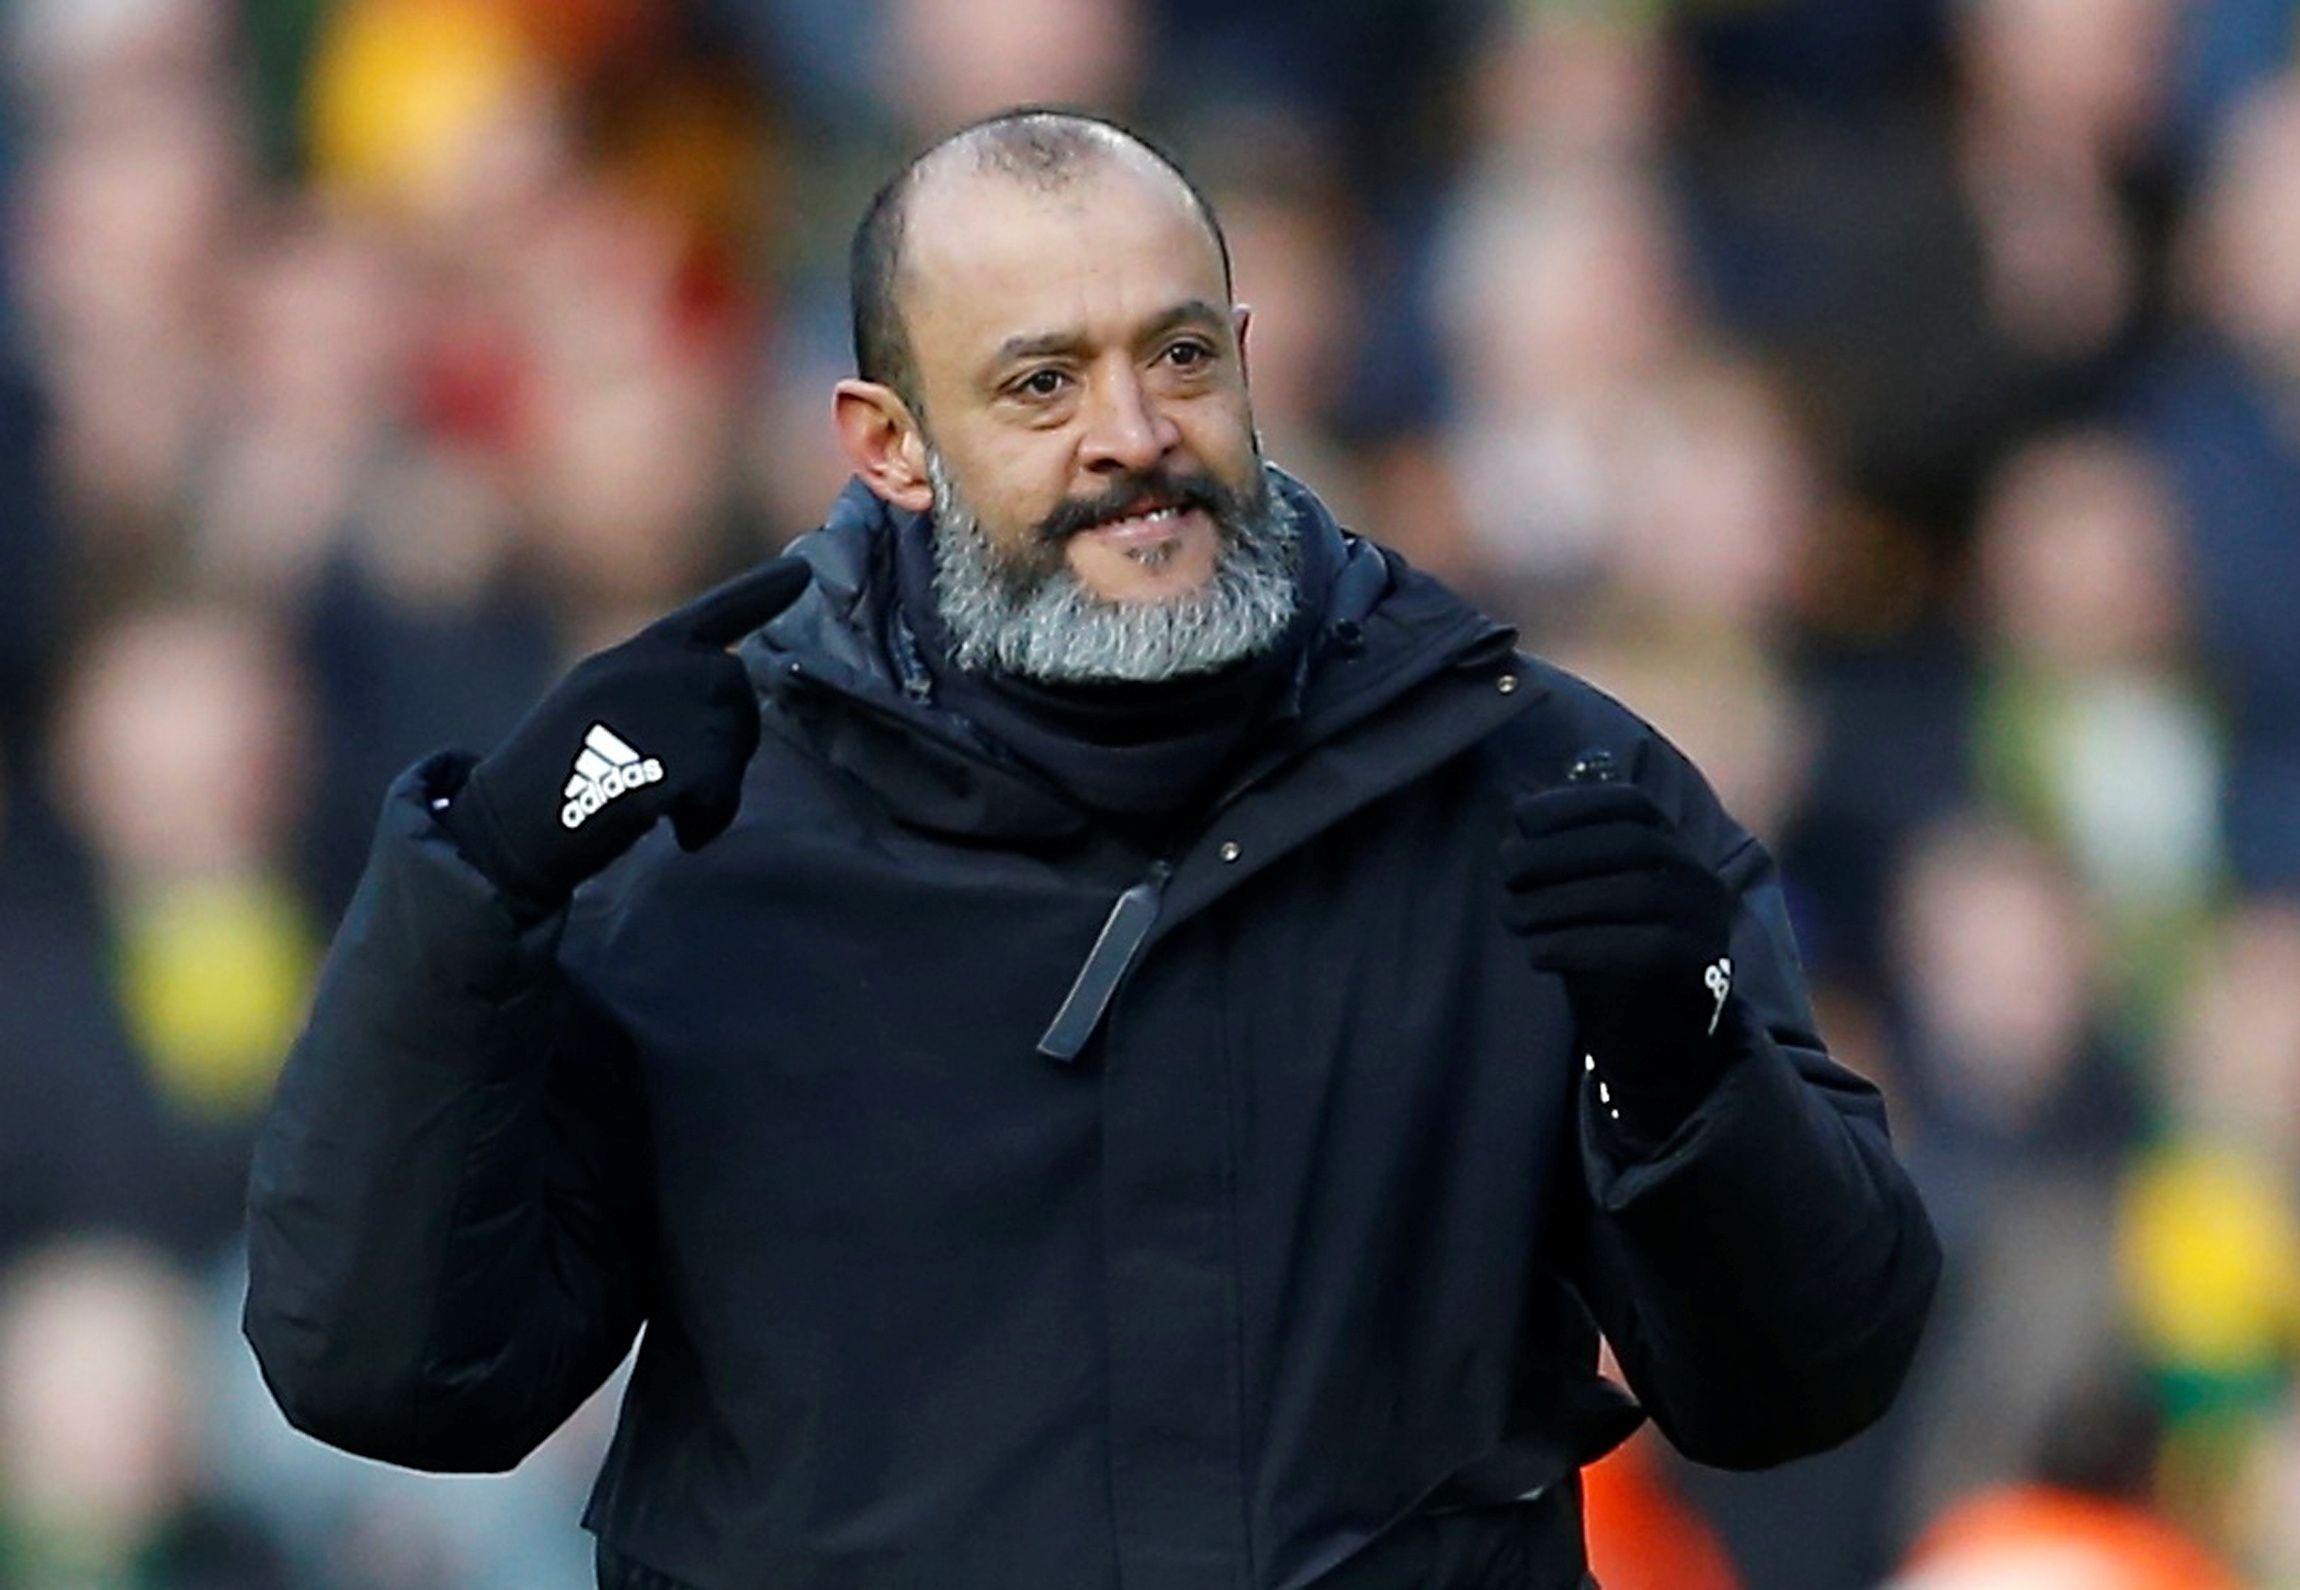 Soccer Football - Premier League - Wolverhampton Wanderers v Norwich City - Molineux Stadium, Wolverhampton, Britain - February 23, 2020  Wolverhampton Wanderers manager Nuno Espirito Santo celebrates after the match   Action Images via Reuters/Craig Brough  EDITORIAL USE ONLY. No use with unauthorized audio, video, data, fixture lists, club/league logos or "live" services. Online in-match use limited to 75 images, no video emulation. No use in betting, games or single club/league/player publica